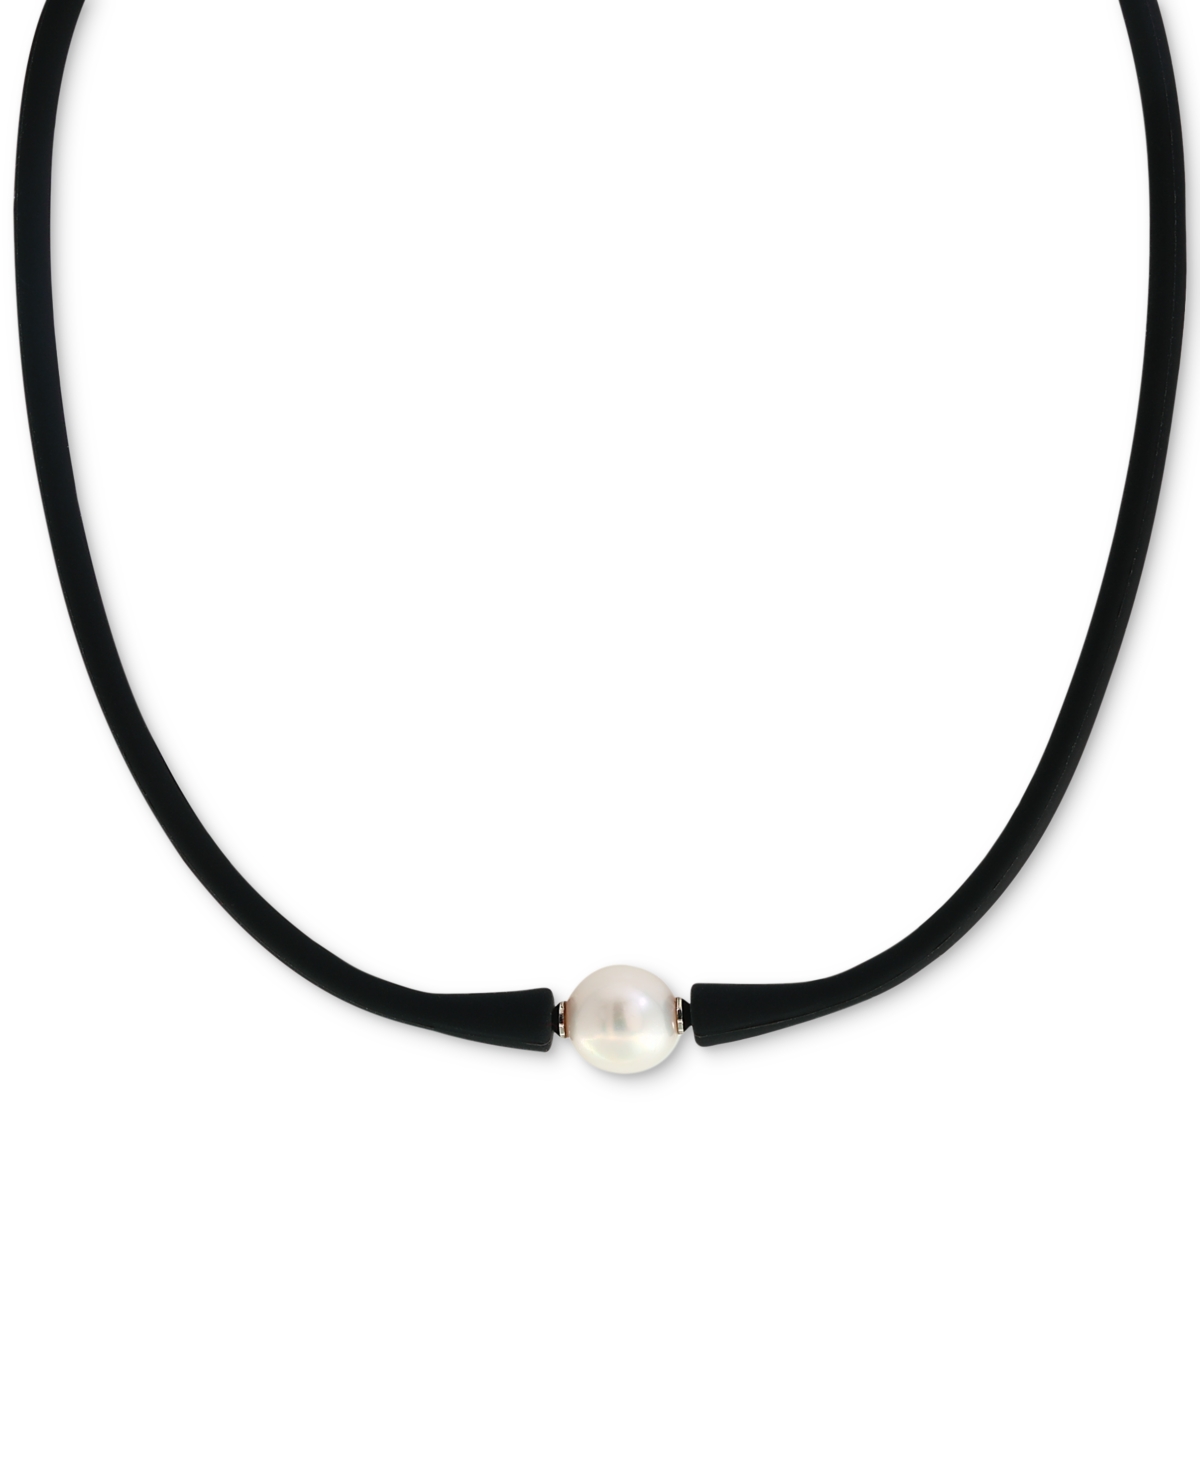 Effy Cultured Freshwater Pearl (11mm) Black Silicone 14" Choker Necklace (Also available in Light Blue, Turquoise or Pink) - Black